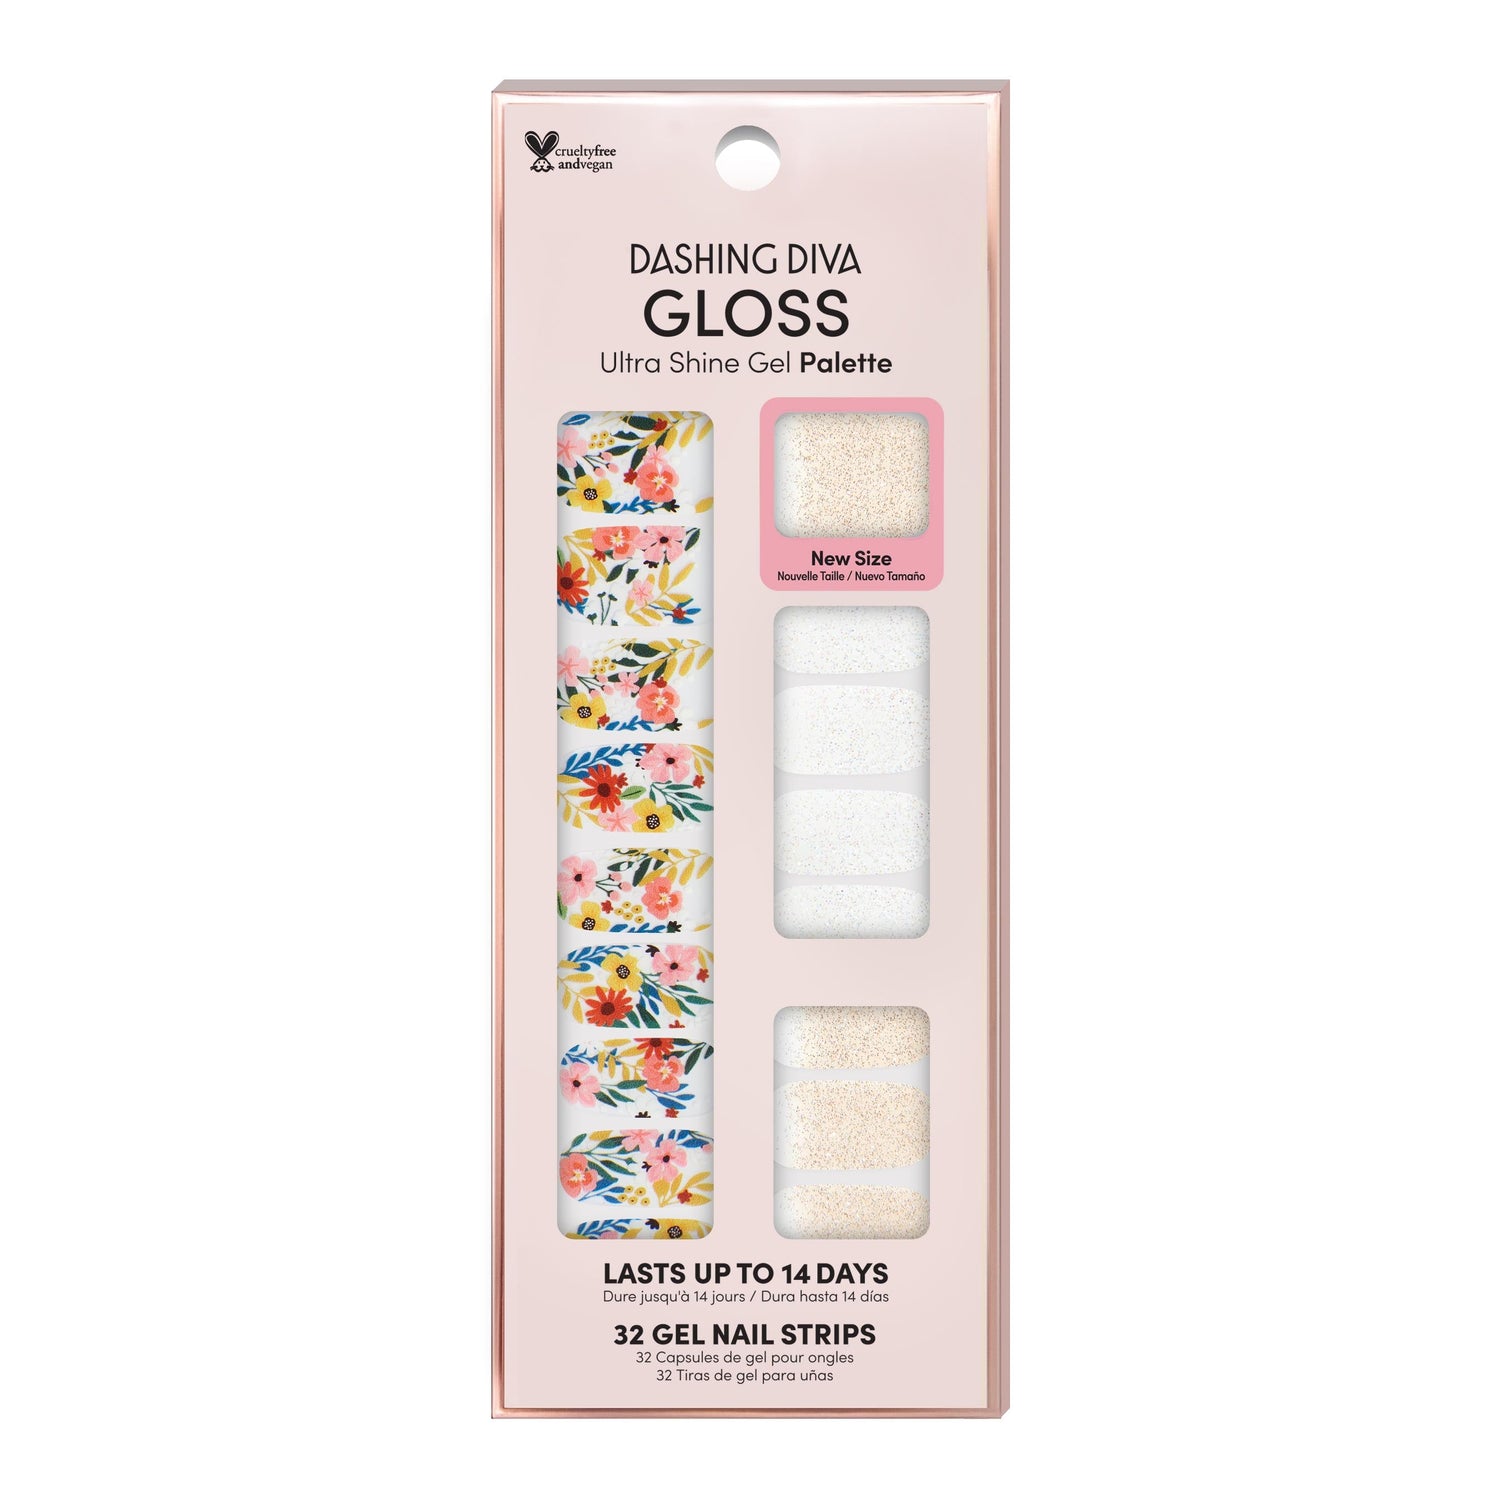 Dashing Diva GLOSS floral print gel nail strips with champagne and white glitter nail accents.